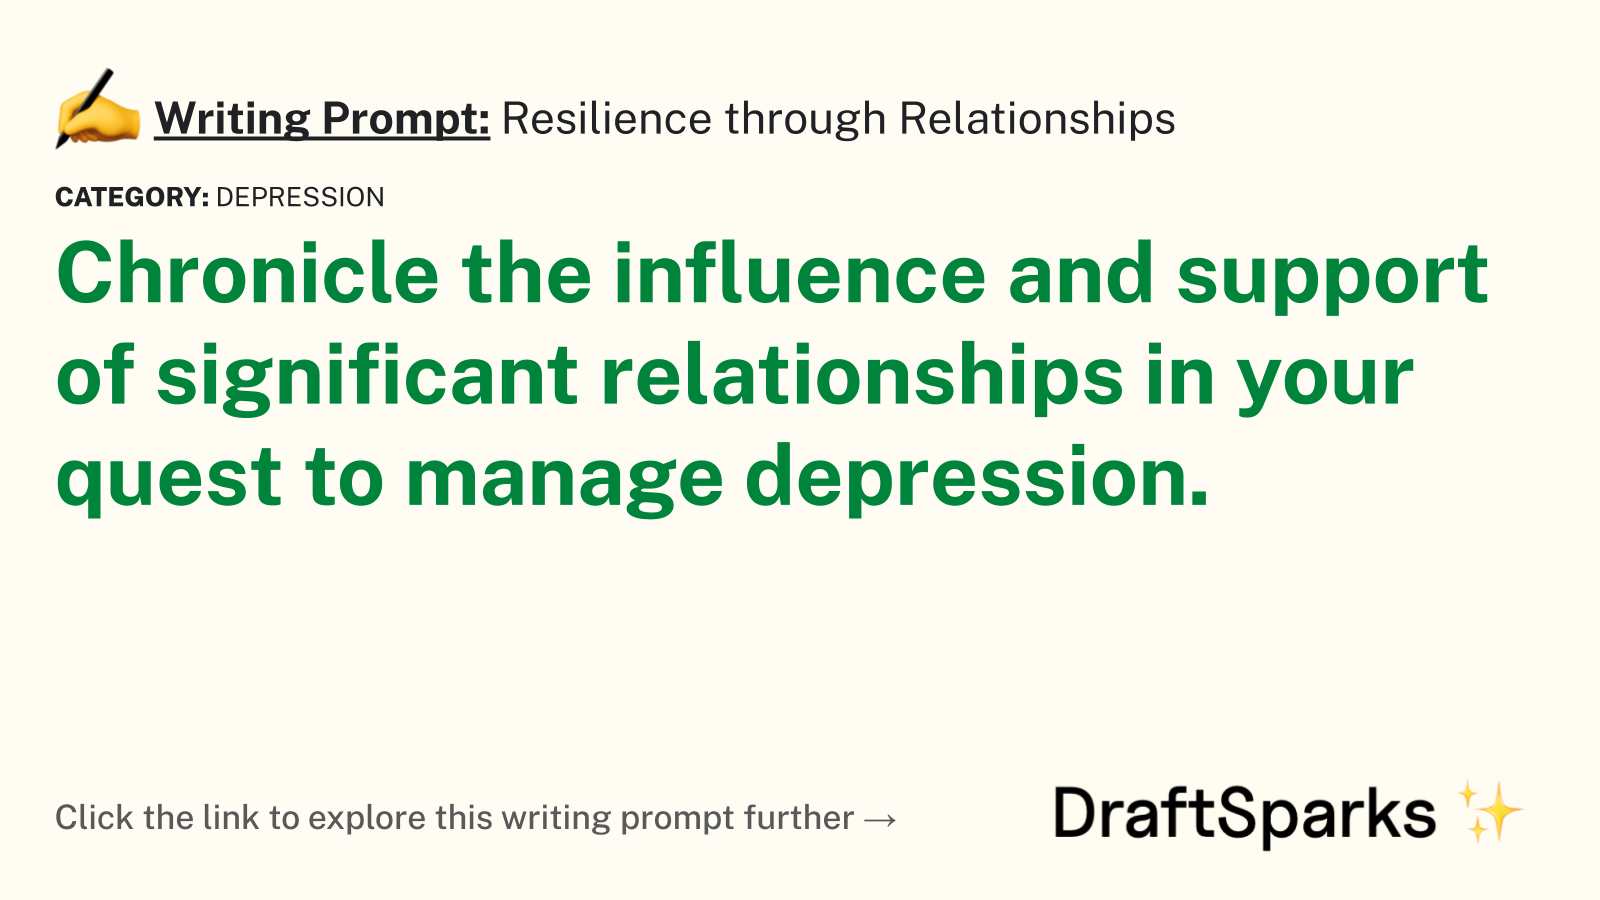 Resilience through Relationships